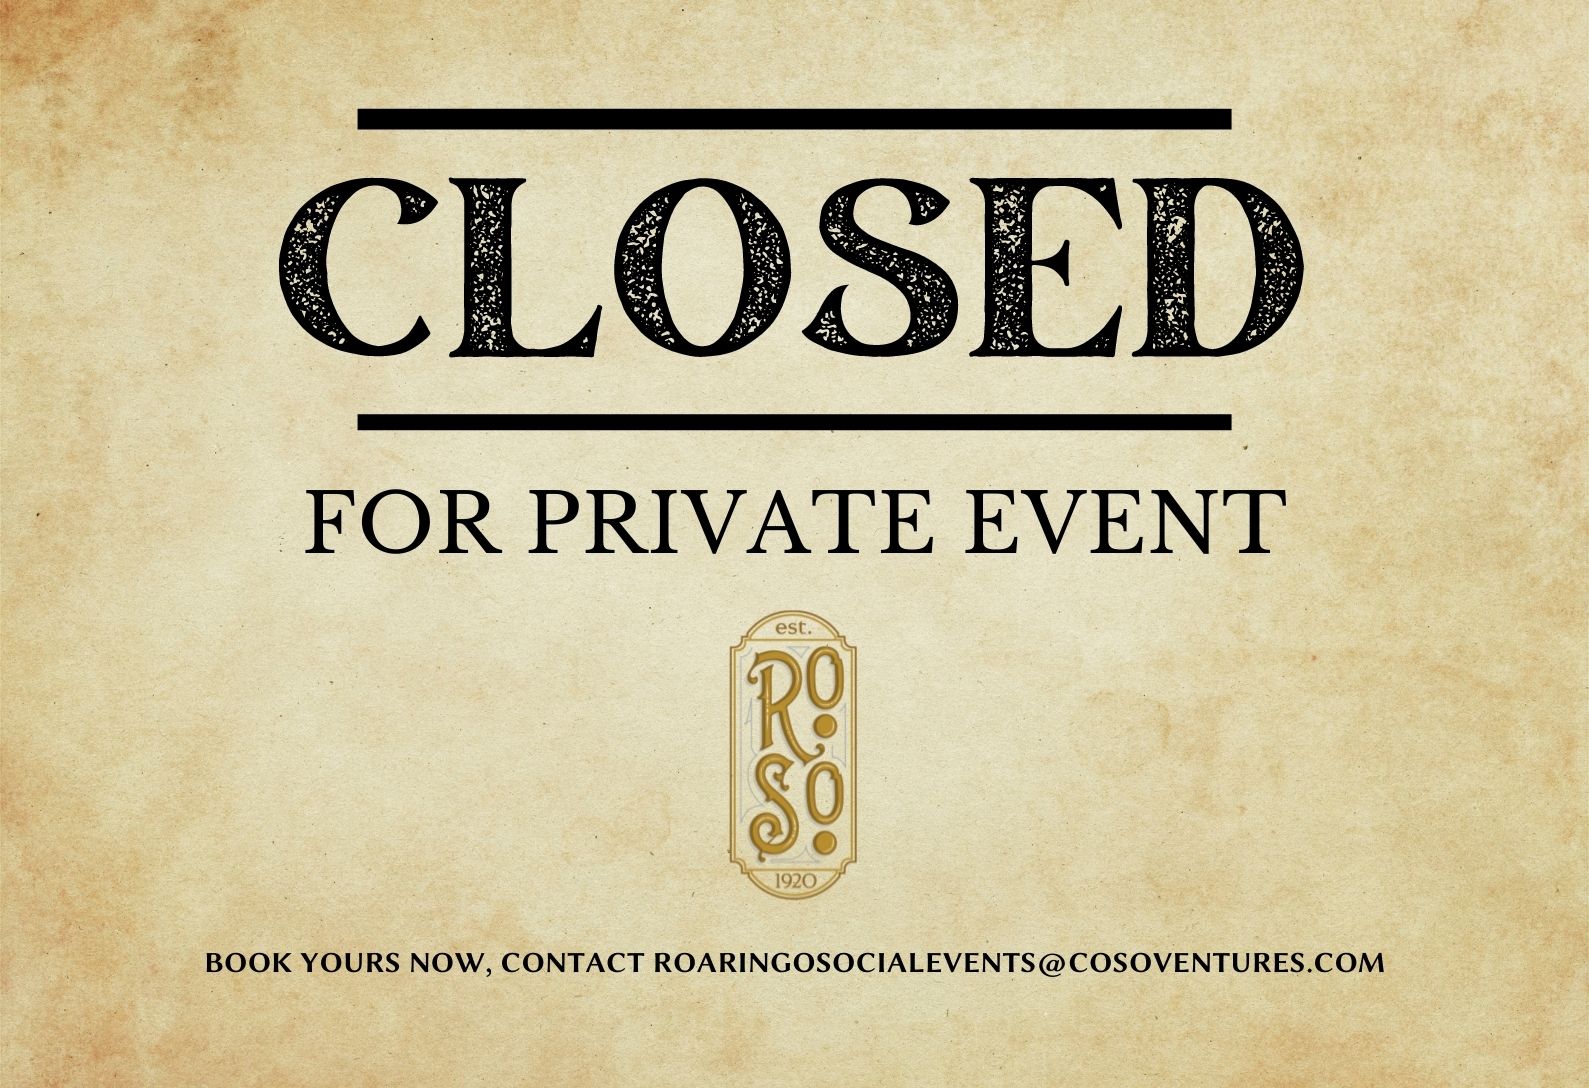 Closed For Private Event